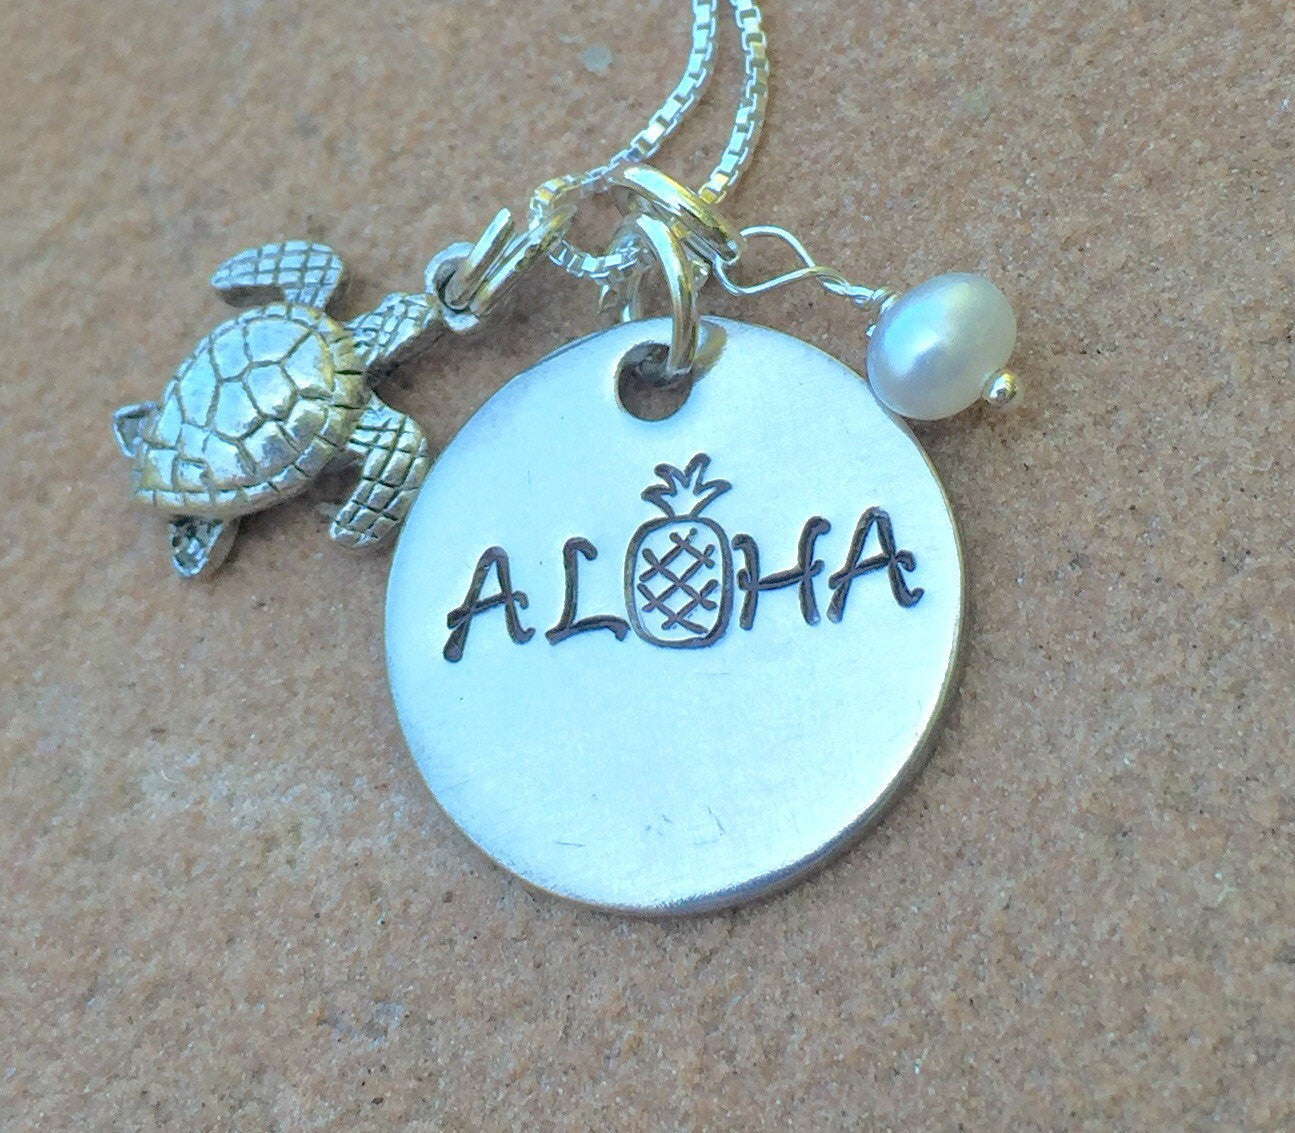 Hawaiian Jewelry, Hawaiian Necklace, Pineapple Necklace, Aloha Pineapple Necklace , Hawaii, Aloha Necklace, natashaaloha - Natashaaloha, jewelry, bracelets, necklace, keychains, fishing lures, gifts for men, charms, personalized, 